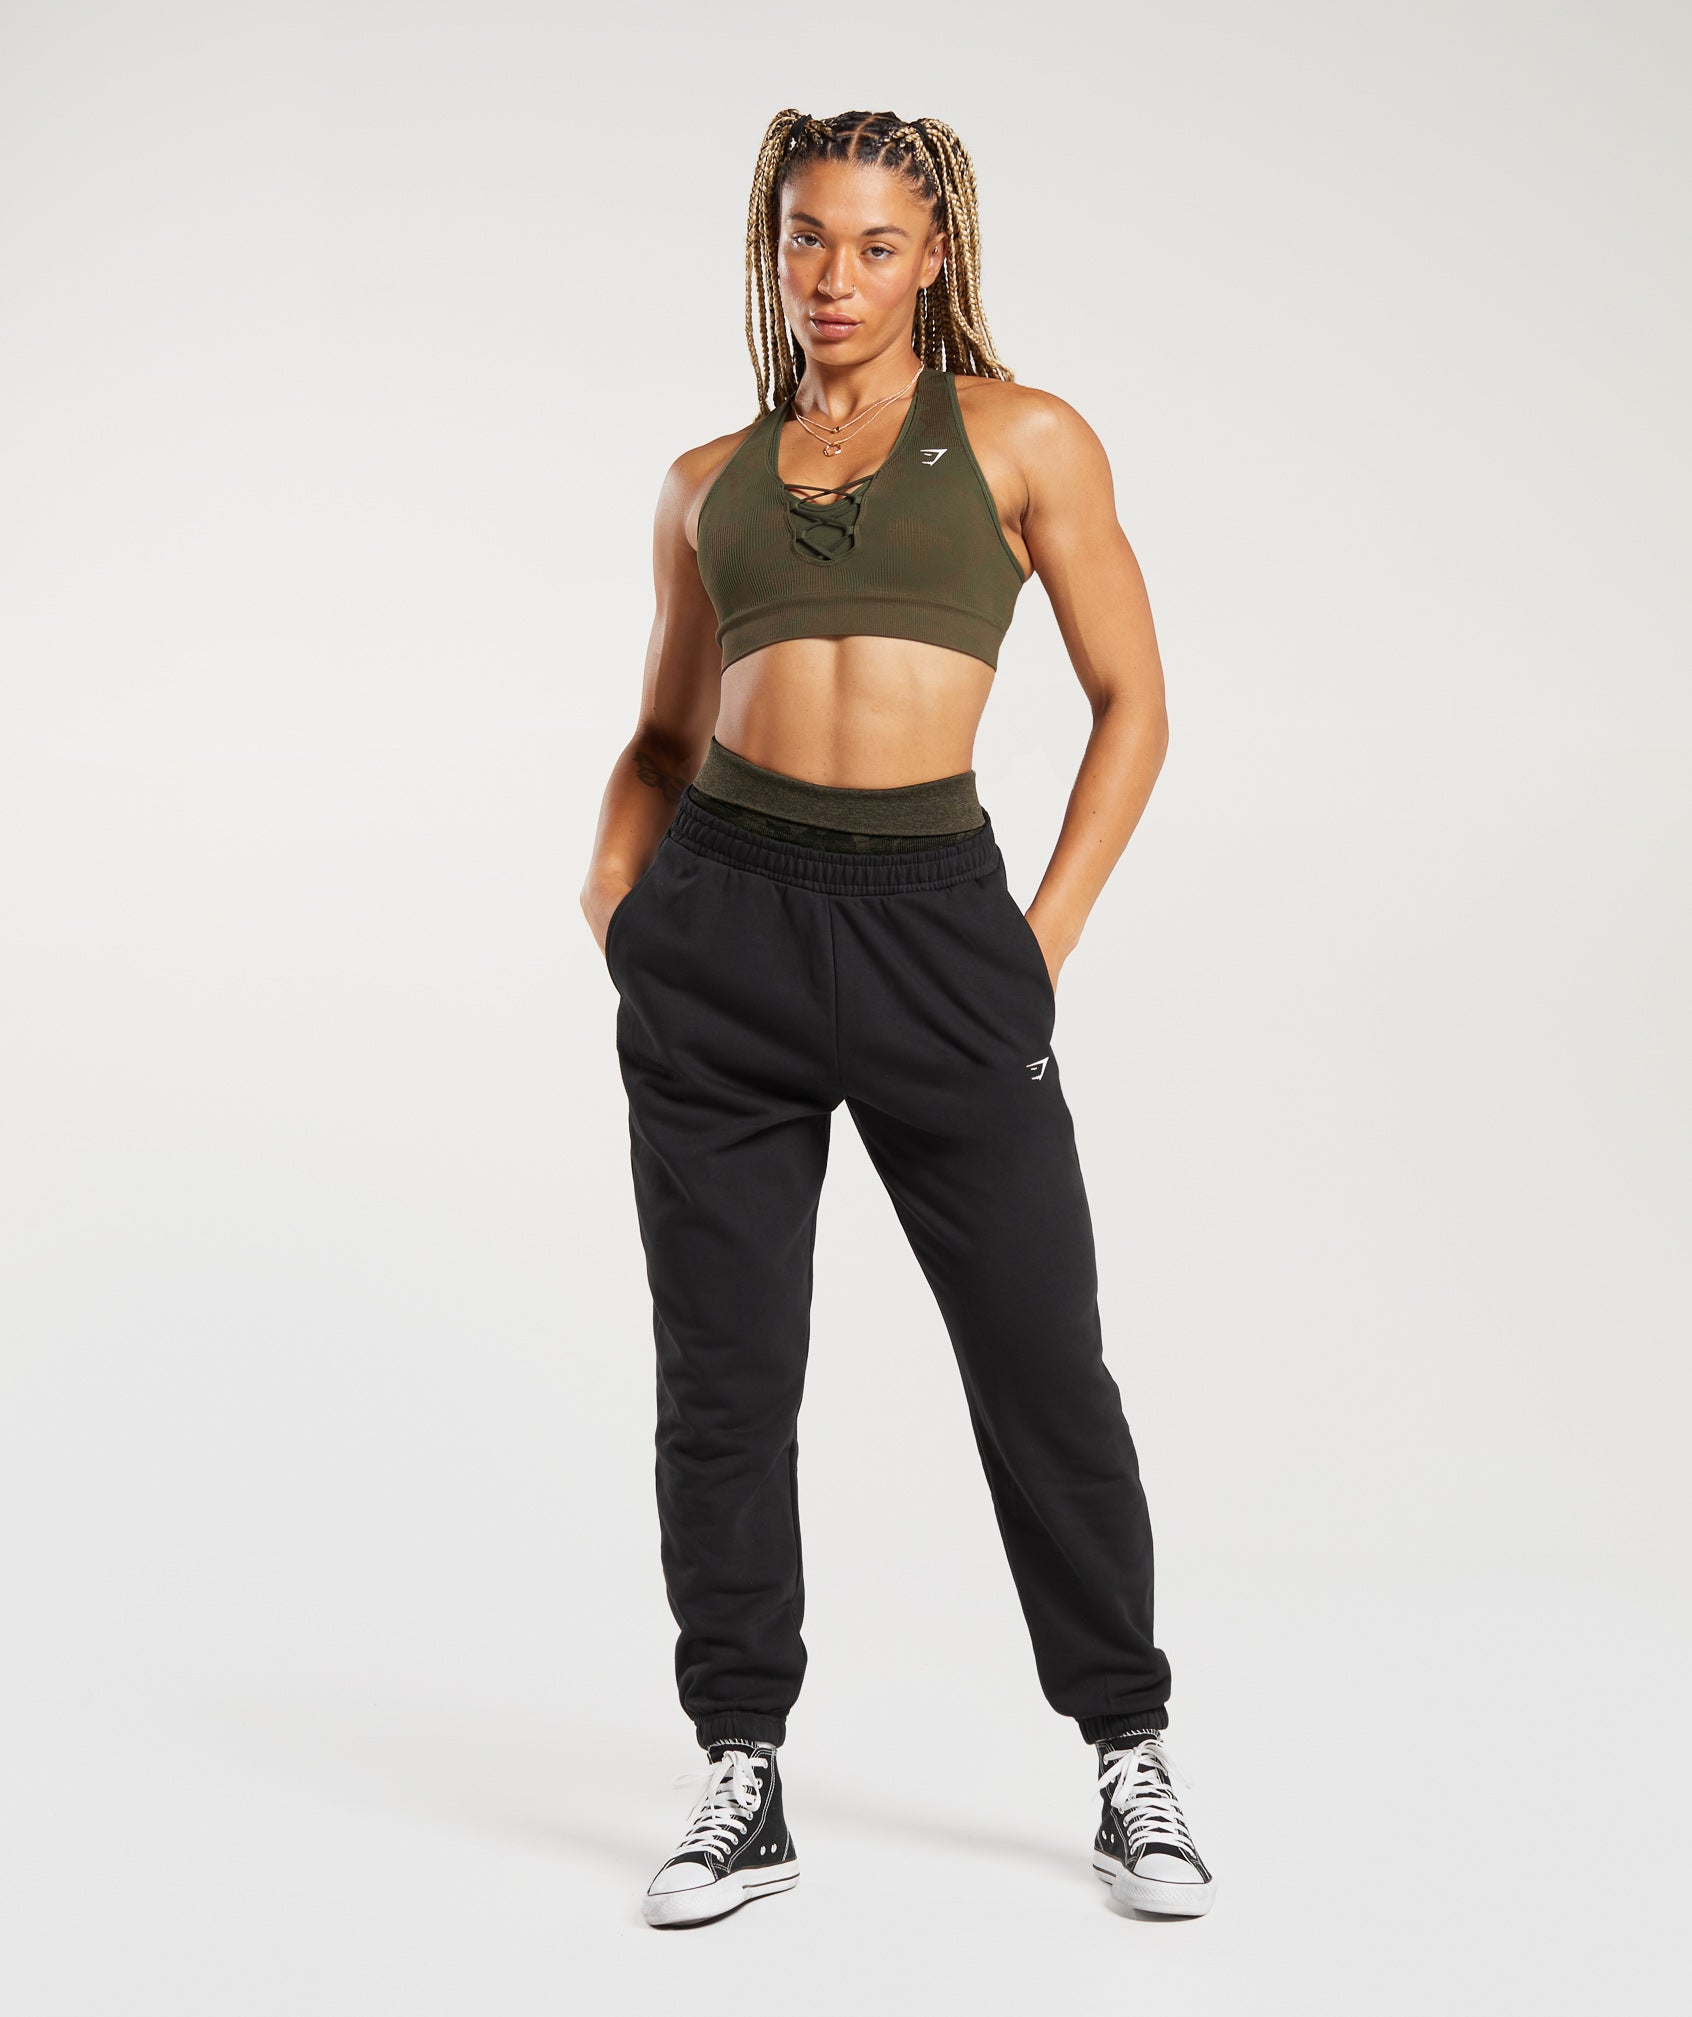 Dare to dream in the Dreamy Sports Bra and Camo Seamless Leggings.  #Gymshark #Gym #Sweat #Train #Perform #Seamless #Exercise #Strength #Strong  #Power #Fitness #…